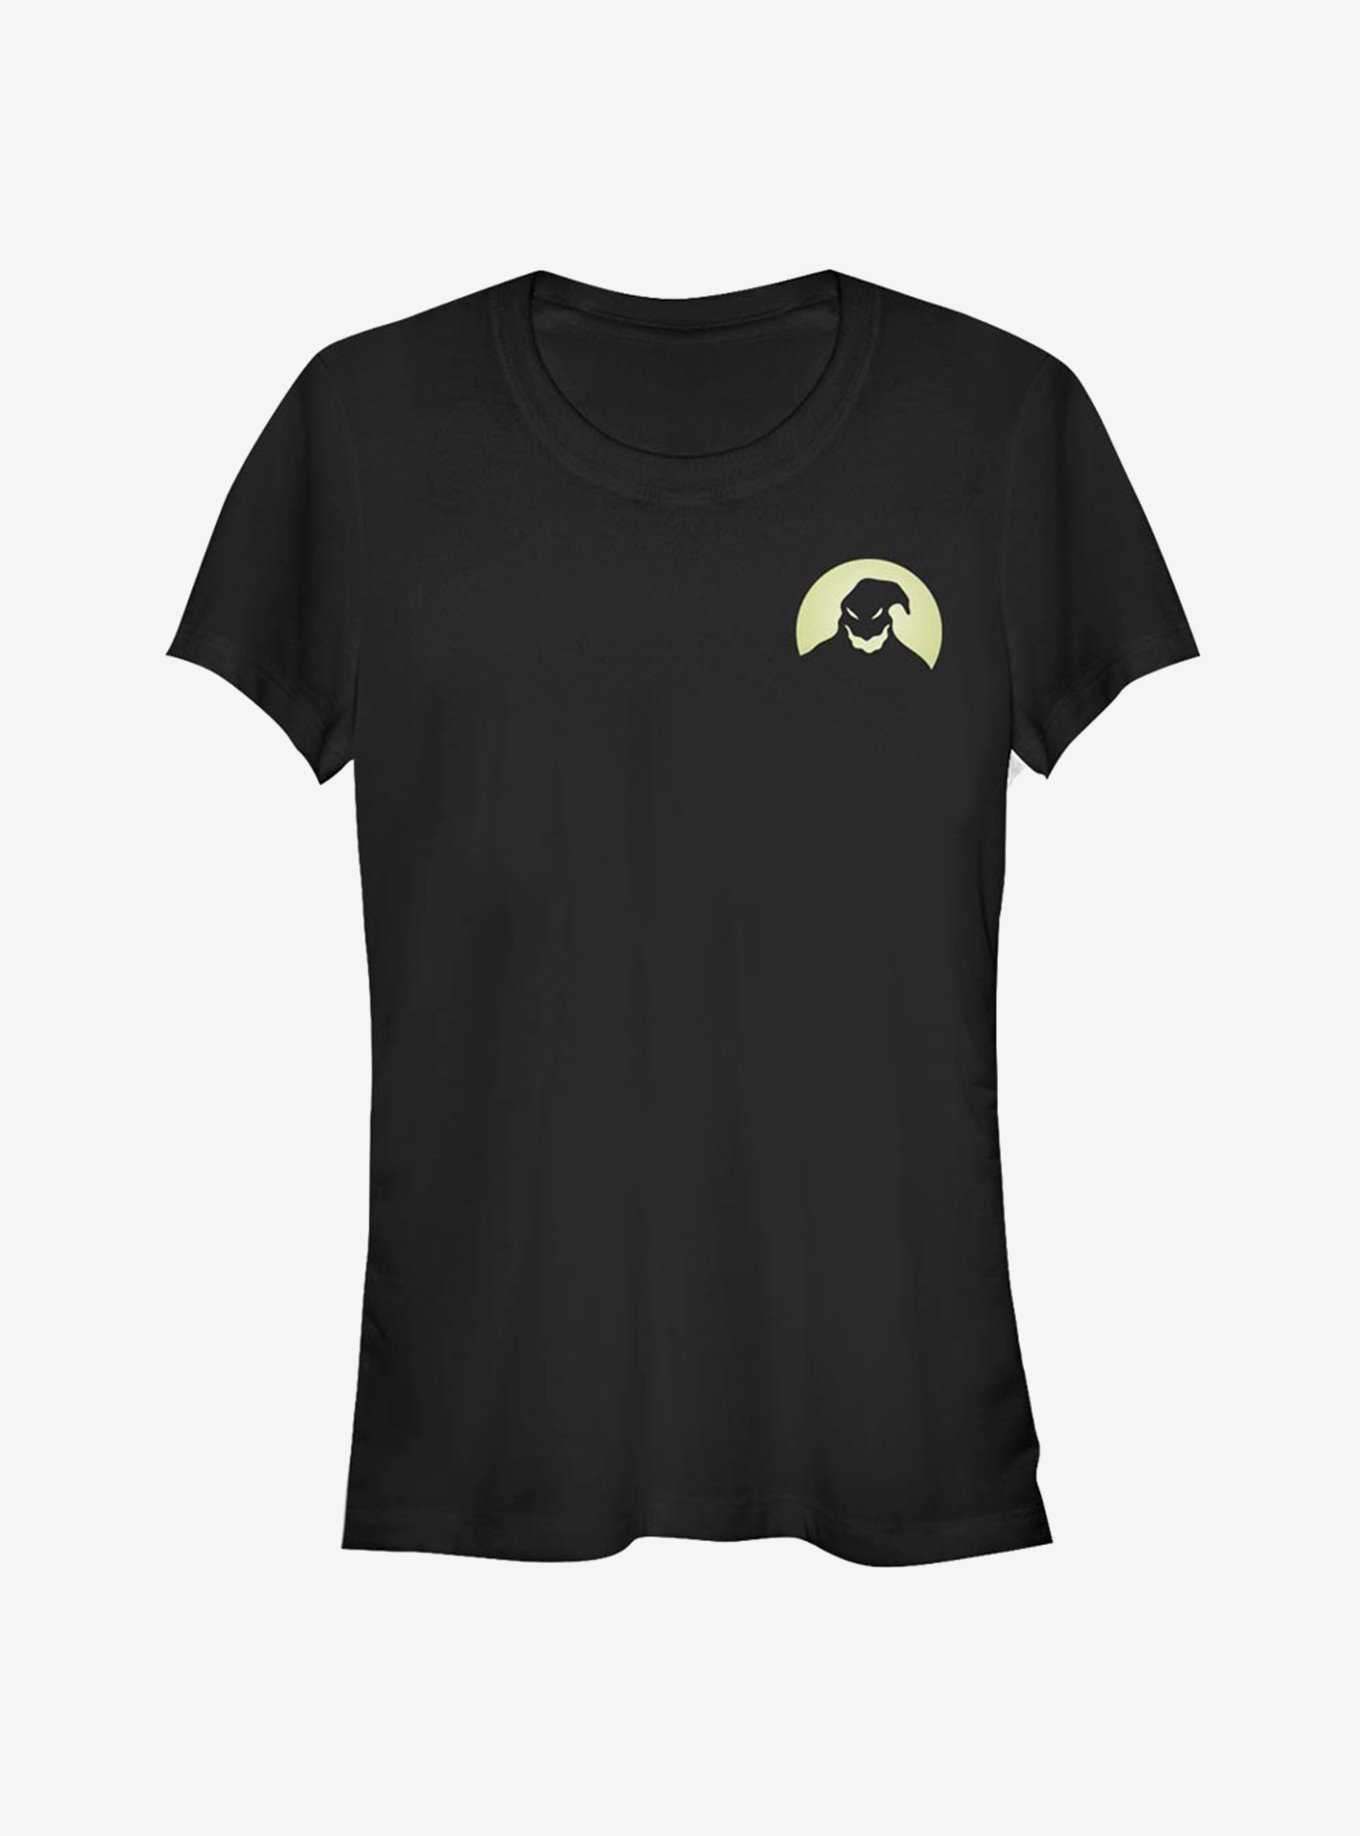 Disney The Nightmare Before Christmas Oogie Boogie Pocket Classic Girls T-Shirt, , hi-res